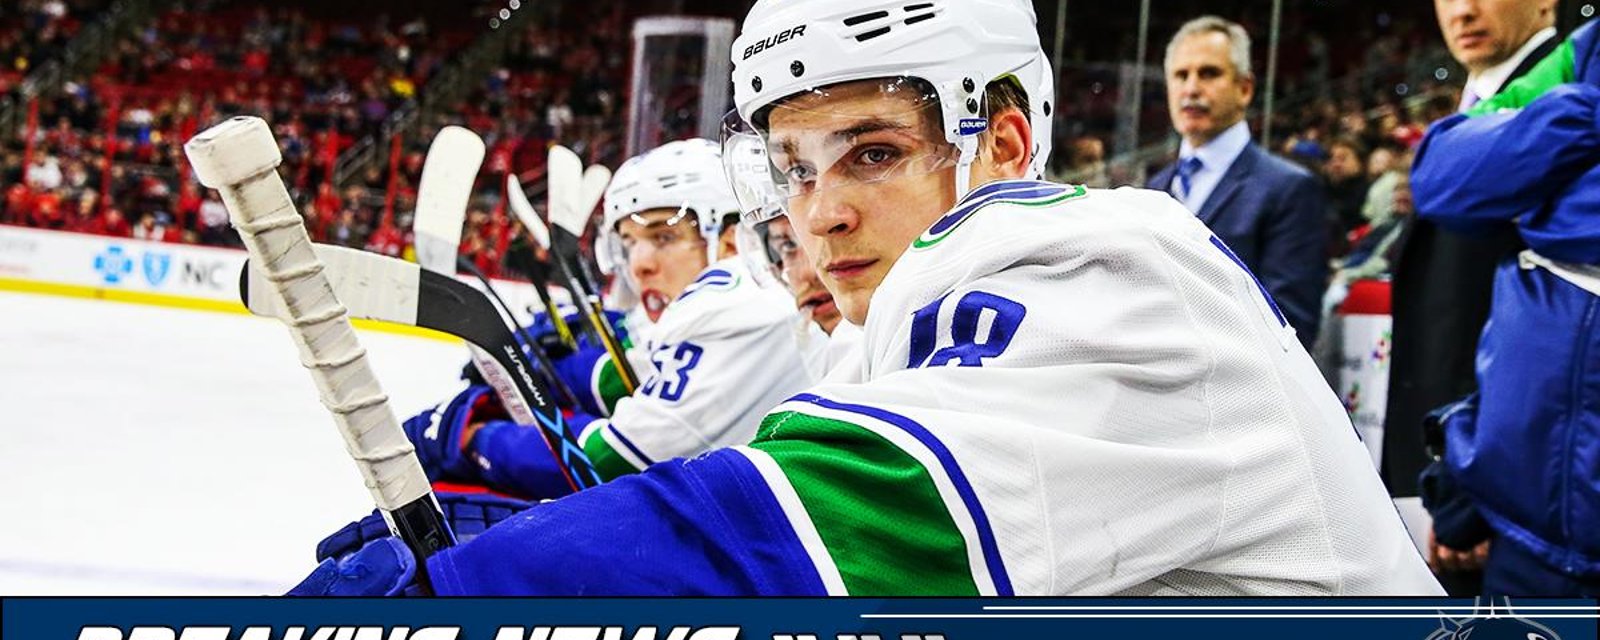 Insider breaks down Vancouver's controversial decision to select Virtanen.